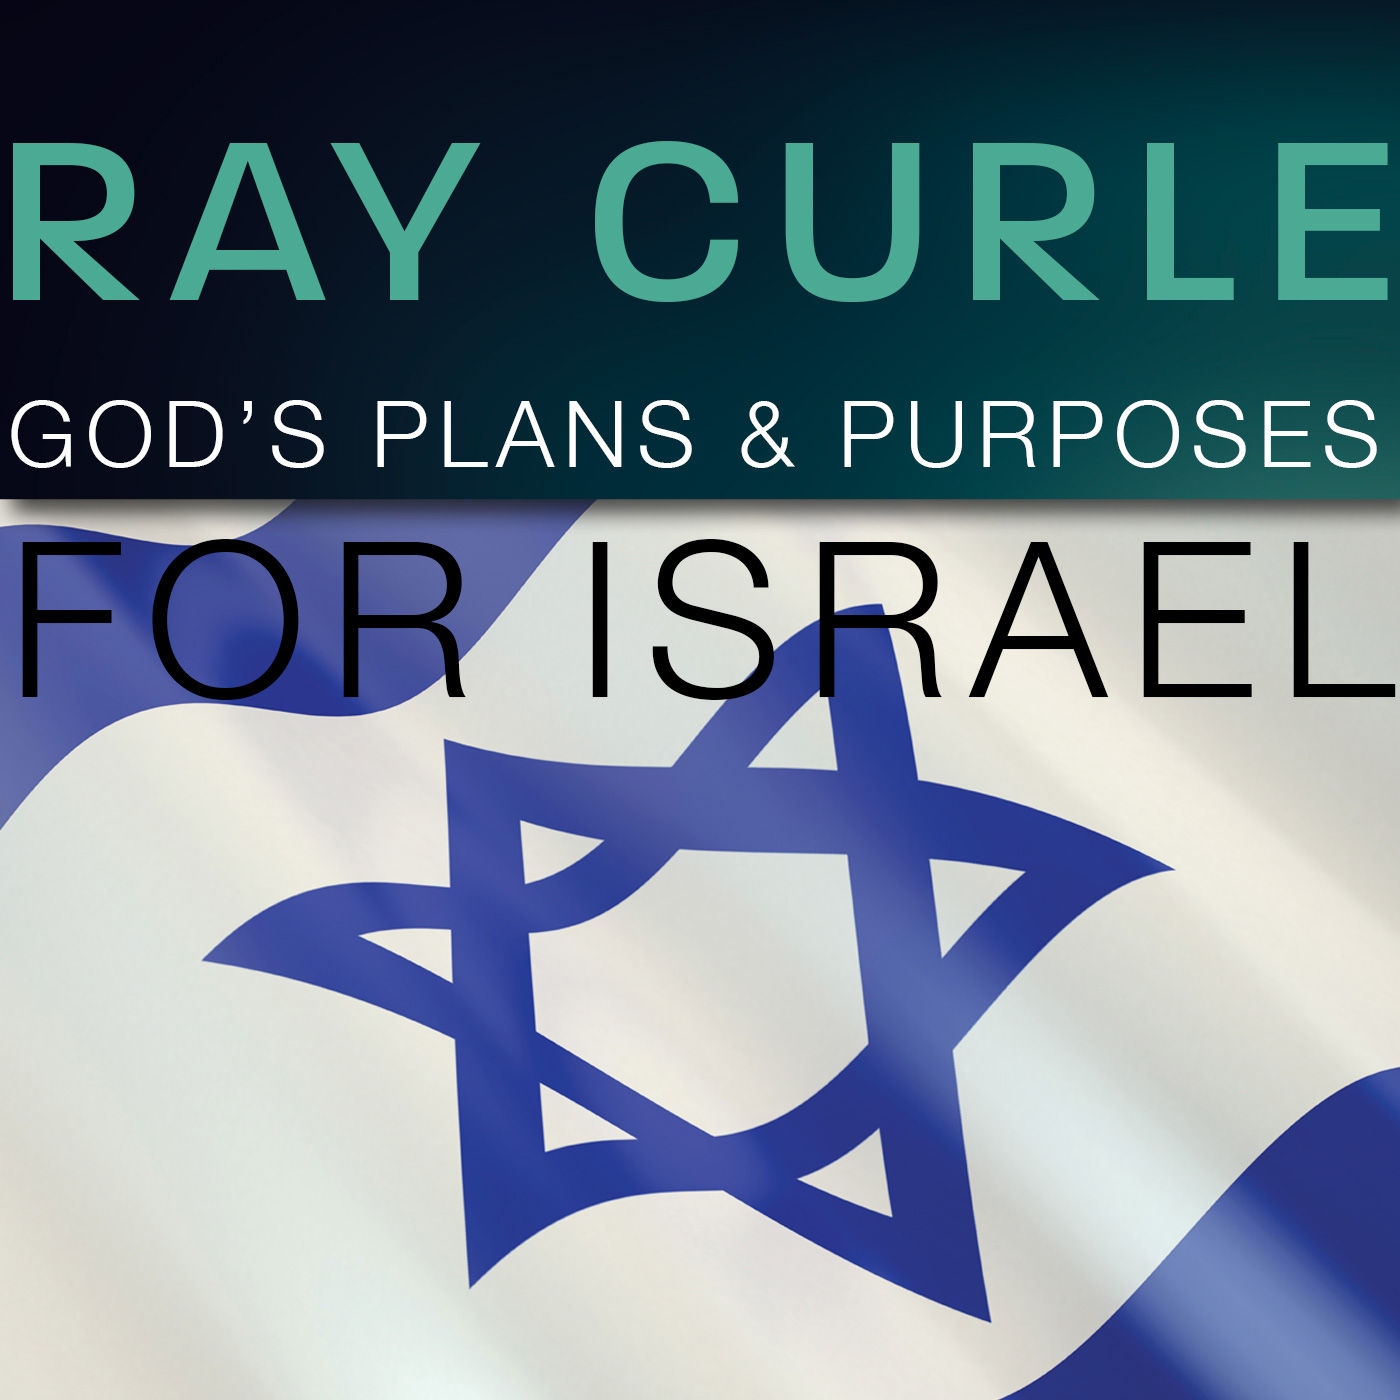 God's Plans & Purposes for Israel